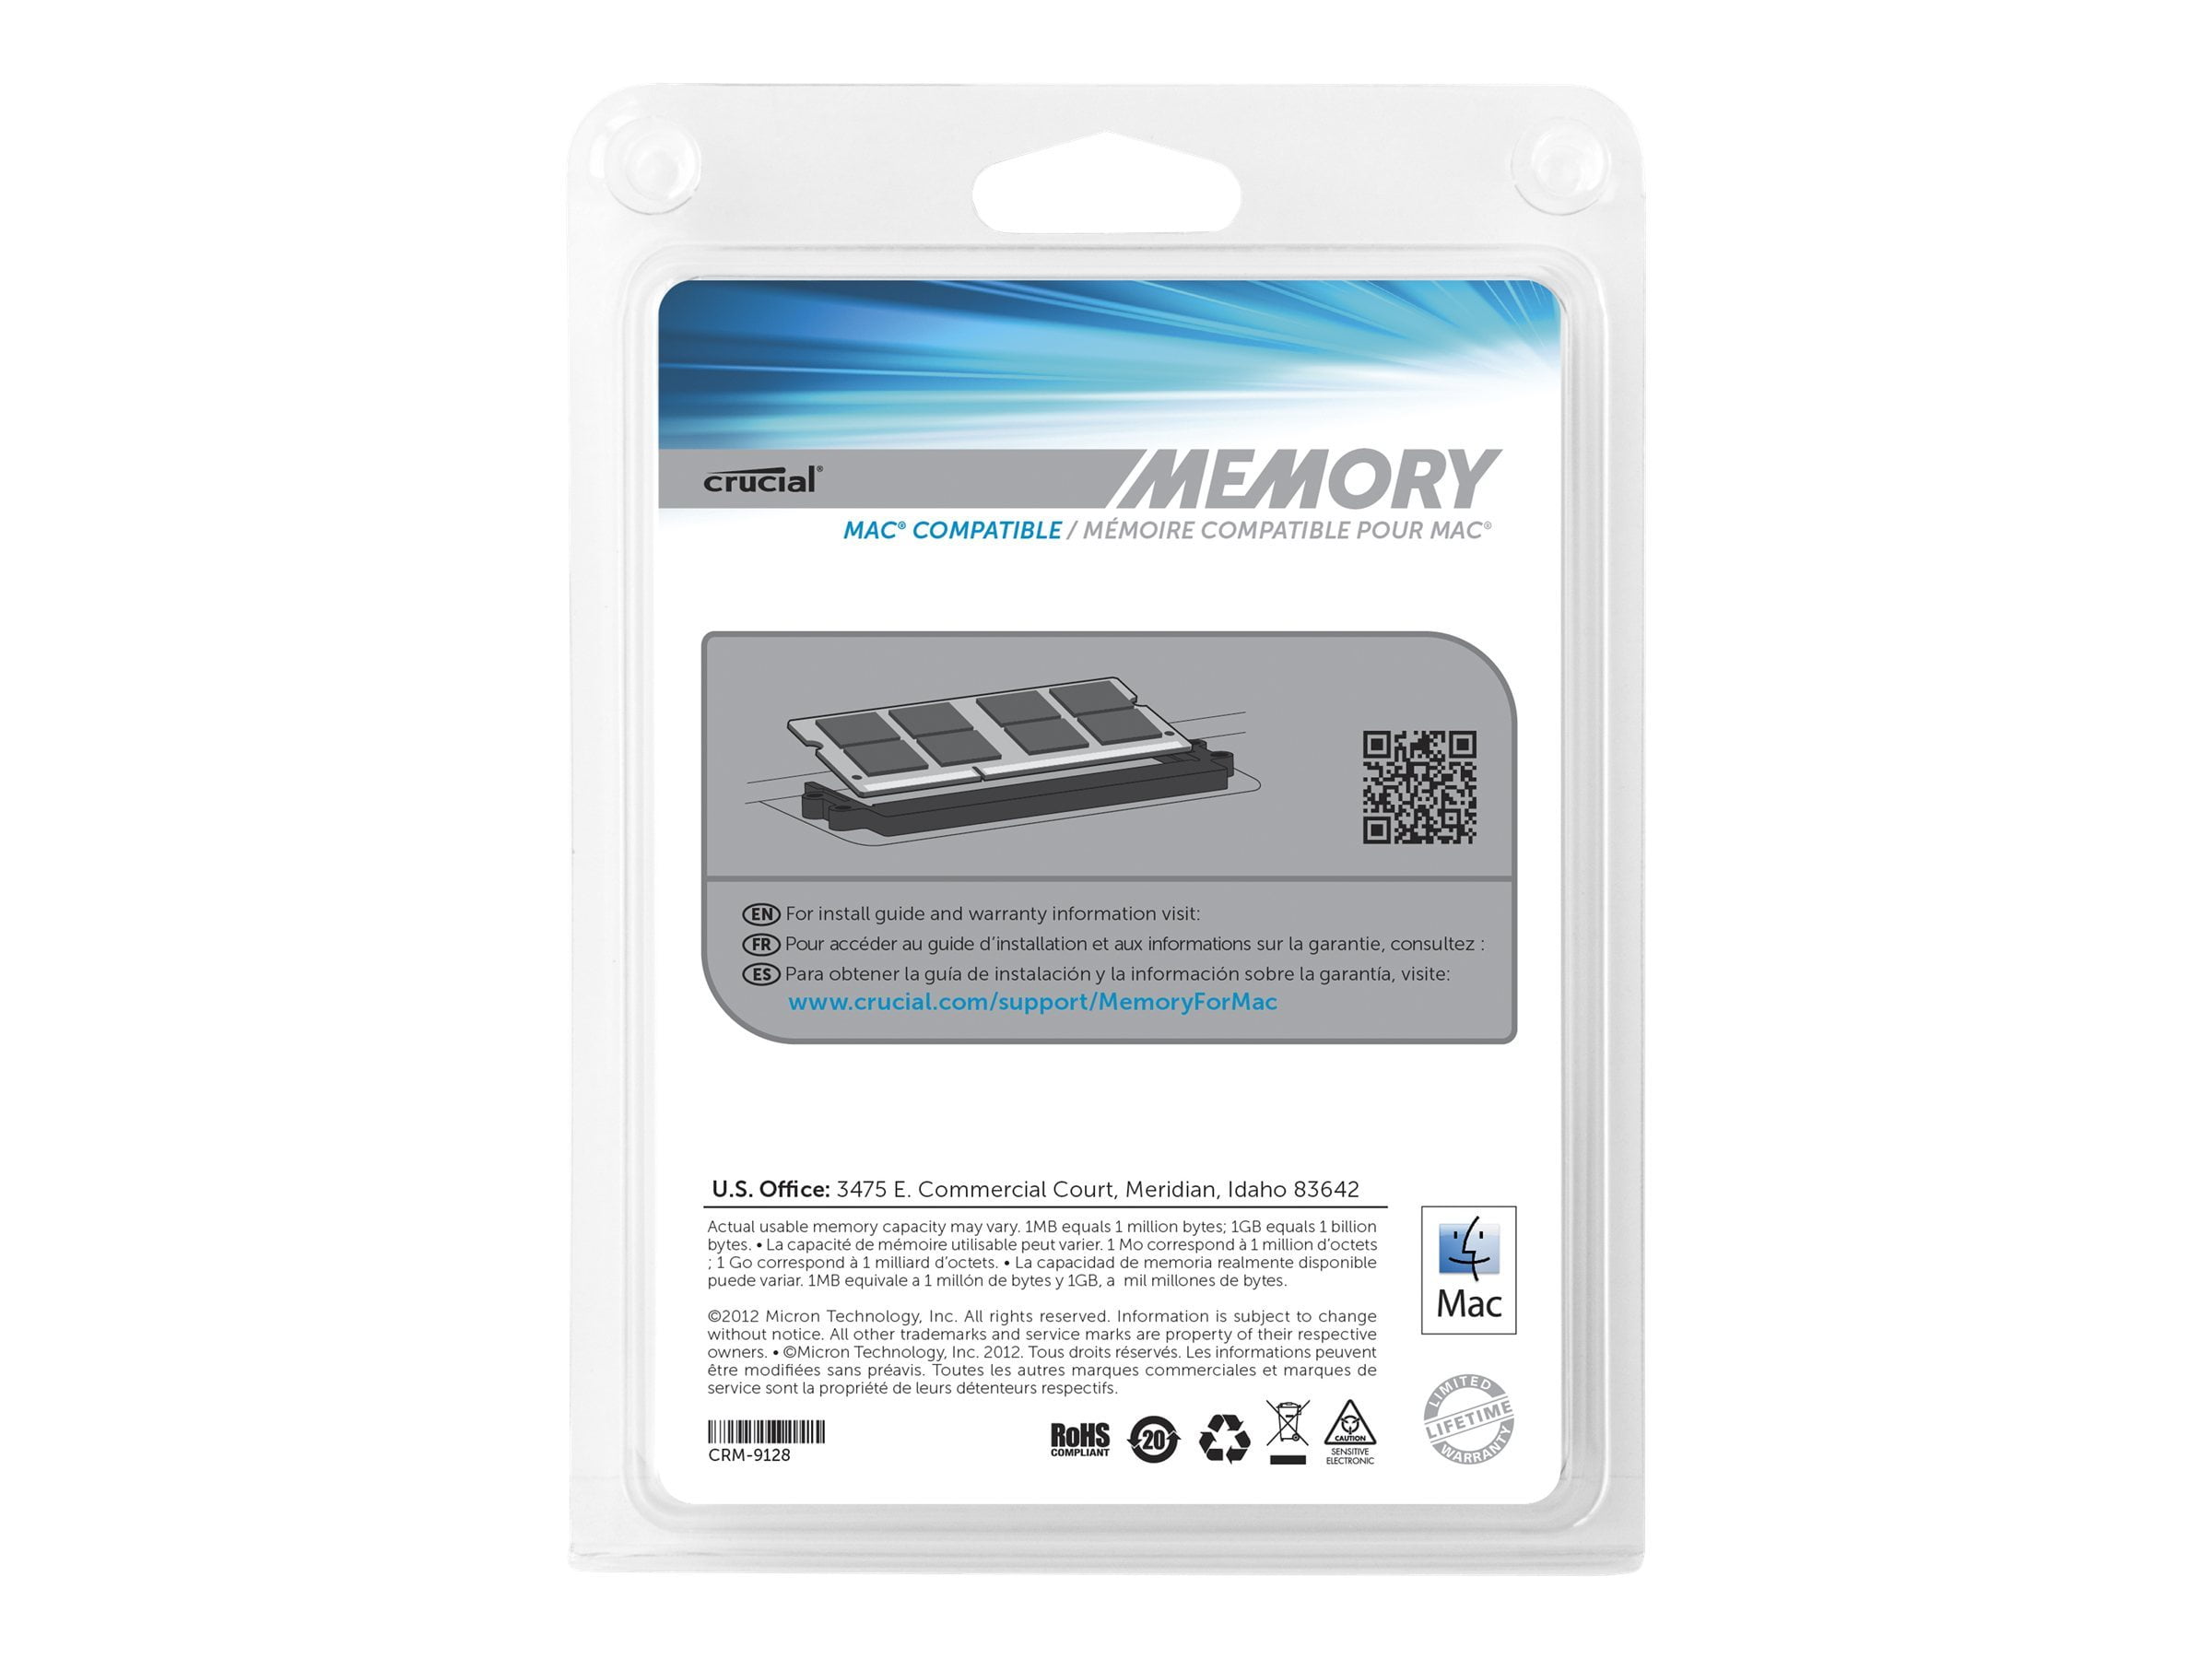  Crucial 8GB Kit (4GBx2) DDR3/DDR3L 1600 MT/s (PC3-12800) SODIMM  204-Pin Memory For Mac - CT2K4G3S160BM : Everything Else